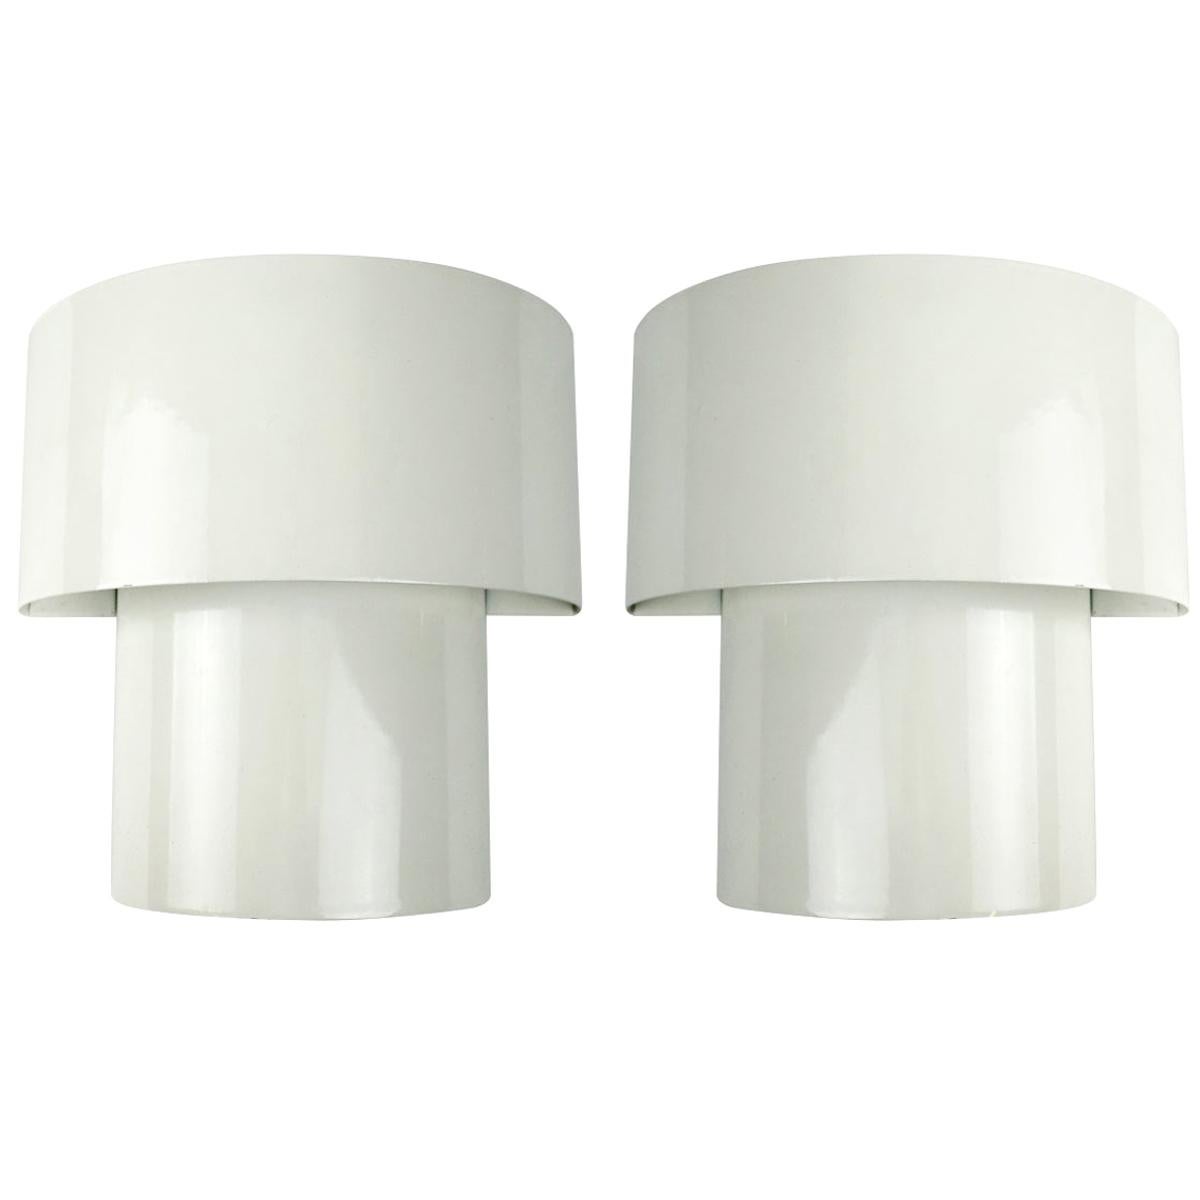 Set of Two Mid-Century Modern White Steel Sconces in RAAK Amsterdam Style For Sale